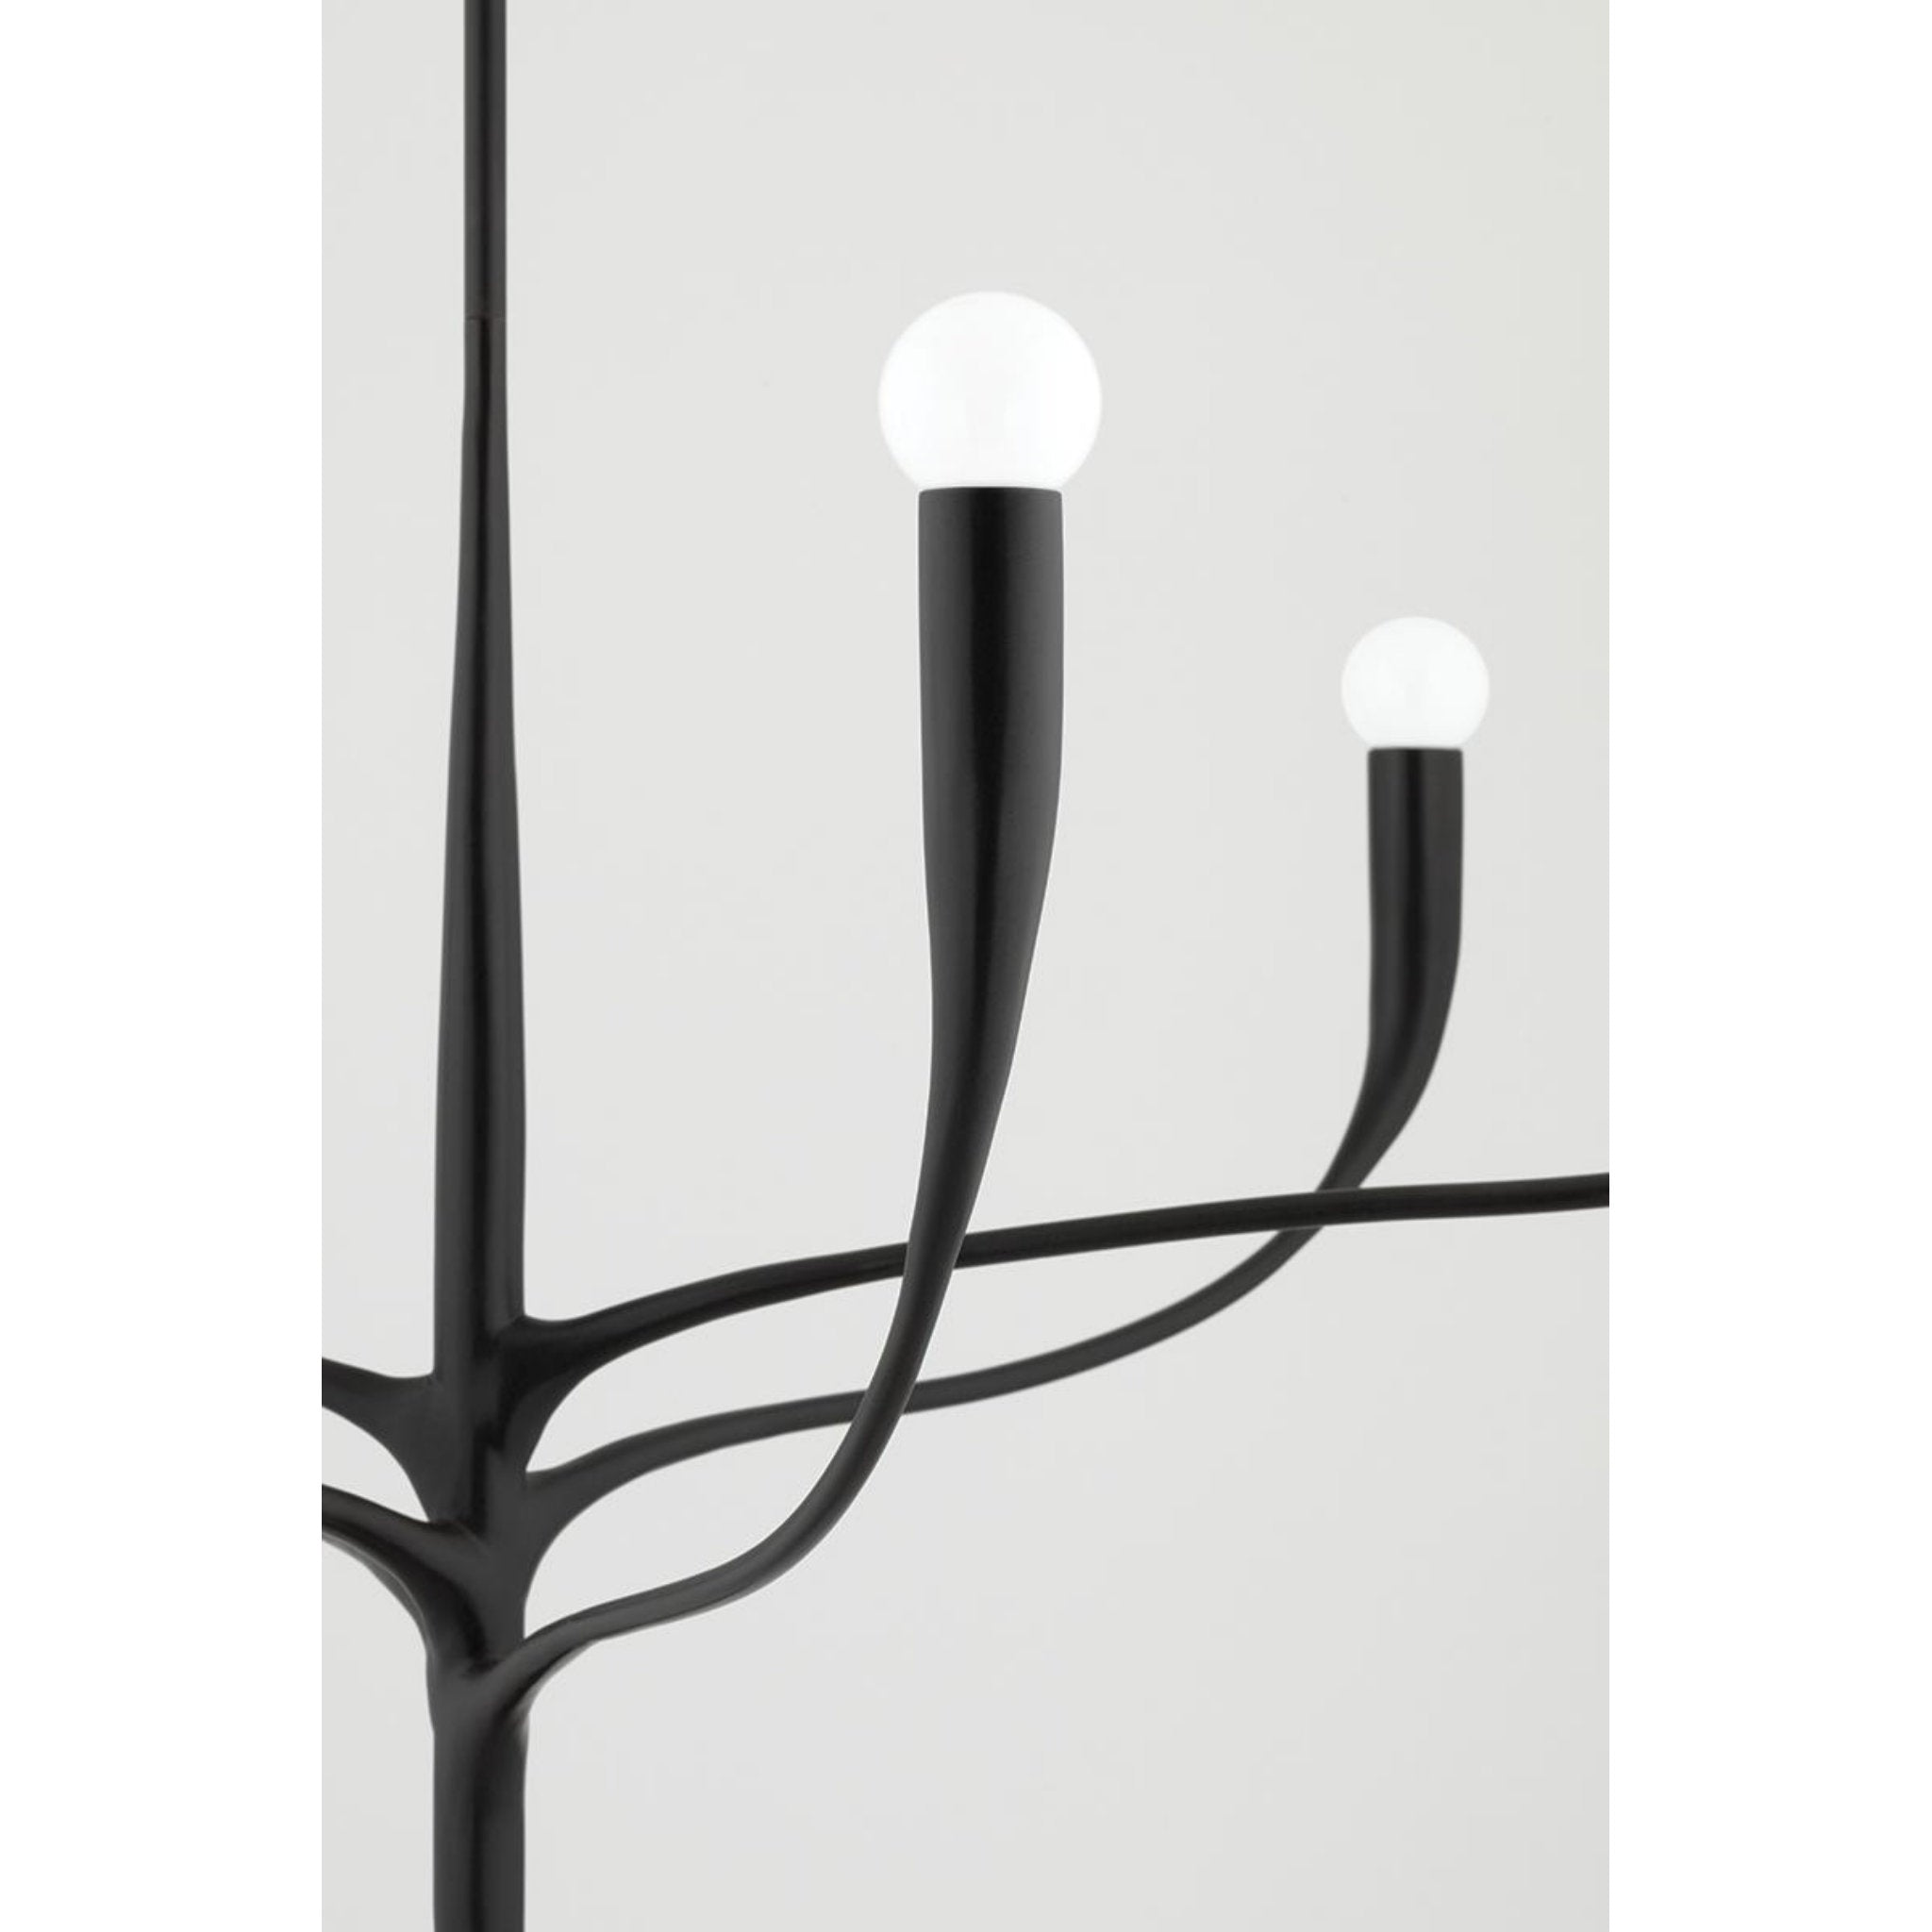 Labra 3 Light Wall Sconce in Aged Iron